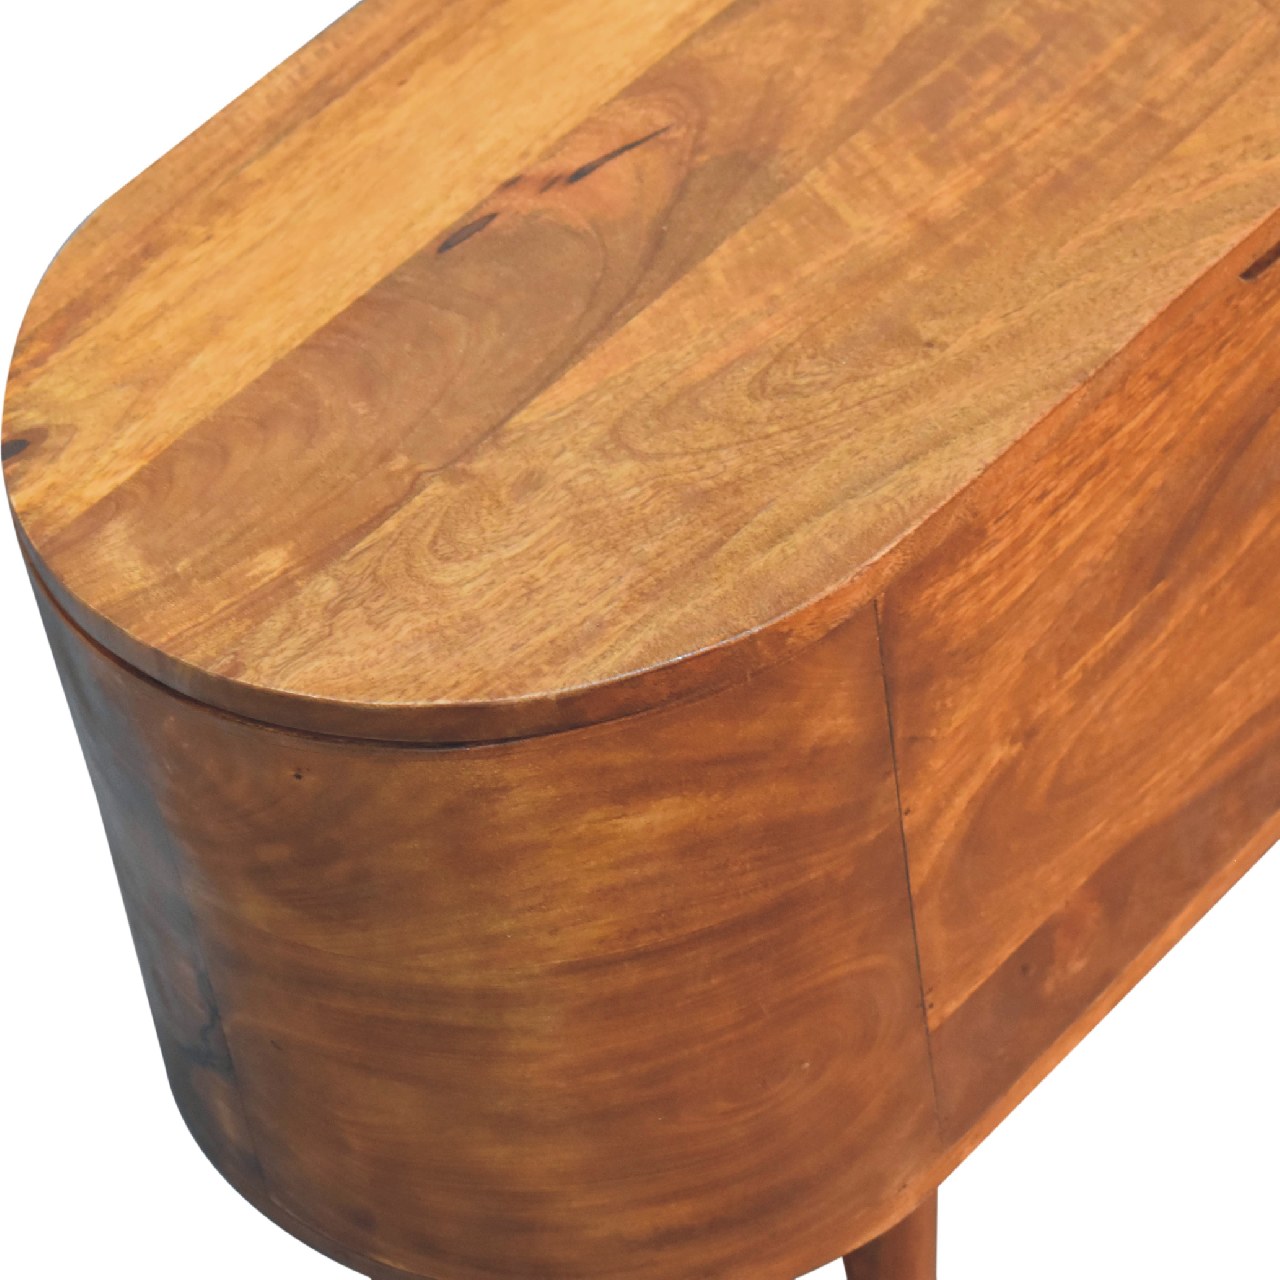 Chestnut Lid Up Rounded Storage Trunk Solid Wood